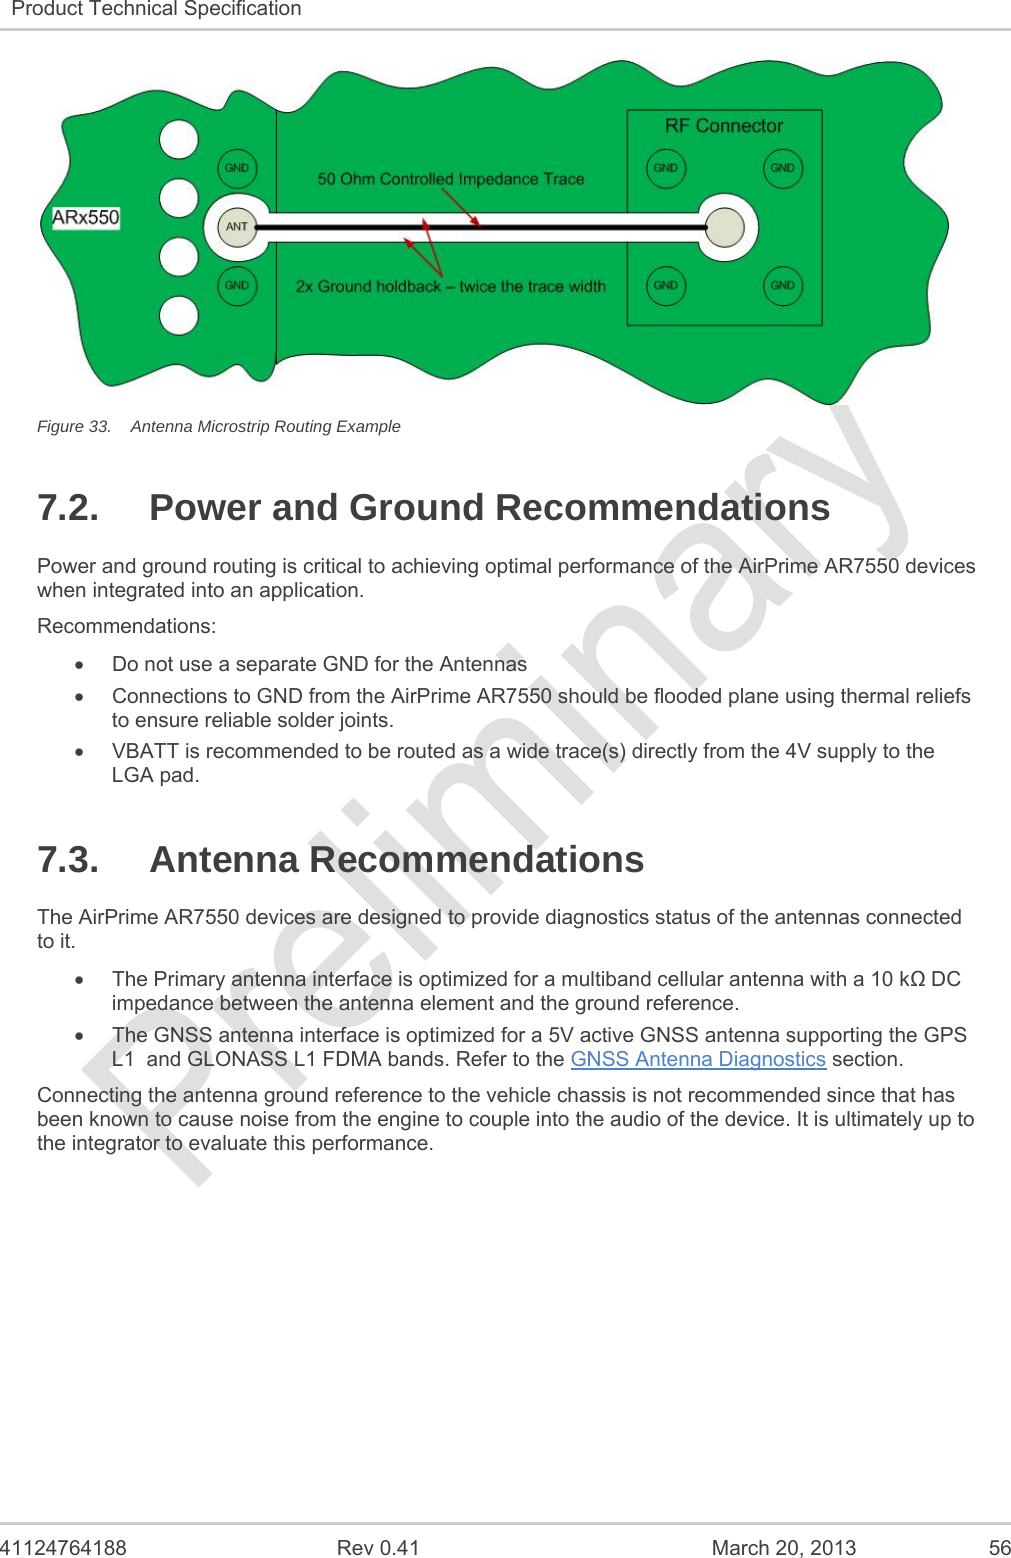   41124764188  Rev 0.41  March 20, 2013  56 Product Technical Specification    Figure 33.  Antenna Microstrip Routing Example 7.2.  Power and Ground Recommendations Power and ground routing is critical to achieving optimal performance of the AirPrime AR7550 devices when integrated into an application.   Recommendations:   Do not use a separate GND for the Antennas   Connections to GND from the AirPrime AR7550 should be flooded plane using thermal reliefs to ensure reliable solder joints.   VBATT is recommended to be routed as a wide trace(s) directly from the 4V supply to the LGA pad. 7.3. Antenna Recommendations The AirPrime AR7550 devices are designed to provide diagnostics status of the antennas connected to it.   The Primary antenna interface is optimized for a multiband cellular antenna with a 10 k DC impedance between the antenna element and the ground reference.   The GNSS antenna interface is optimized for a 5V active GNSS antenna supporting the GPS L1  and GLONASS L1 FDMA bands. Refer to the GNSS Antenna Diagnostics section. Connecting the antenna ground reference to the vehicle chassis is not recommended since that has been known to cause noise from the engine to couple into the audio of the device. It is ultimately up to the integrator to evaluate this performance.   